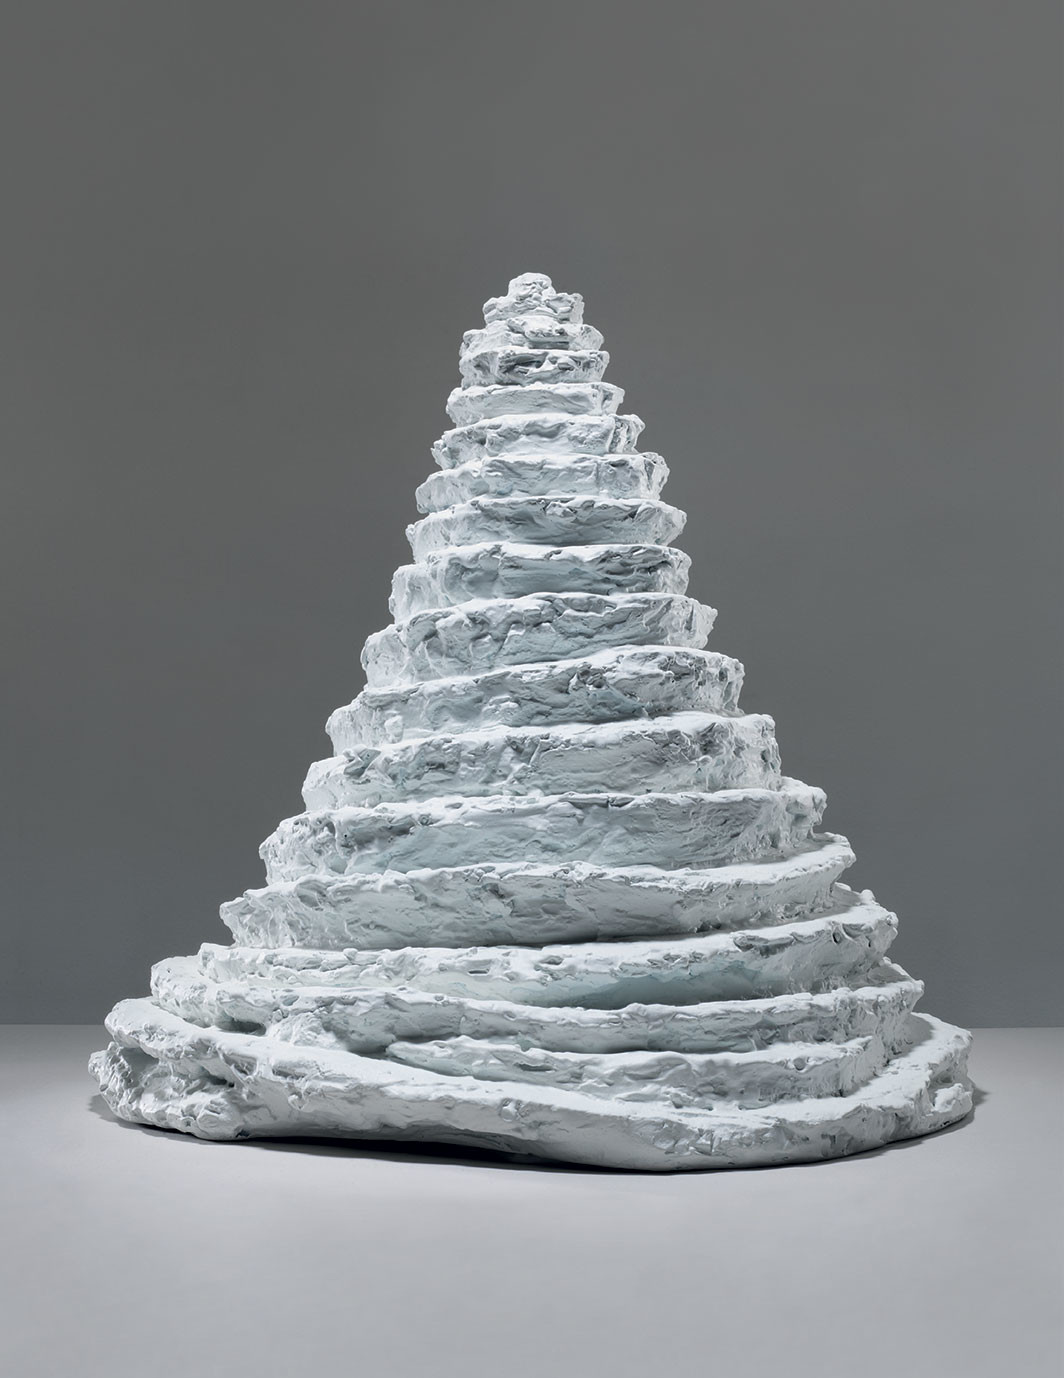 Louise Bourgeois, Lair, 1962, paint on bronze, 22 × 22 × 22".